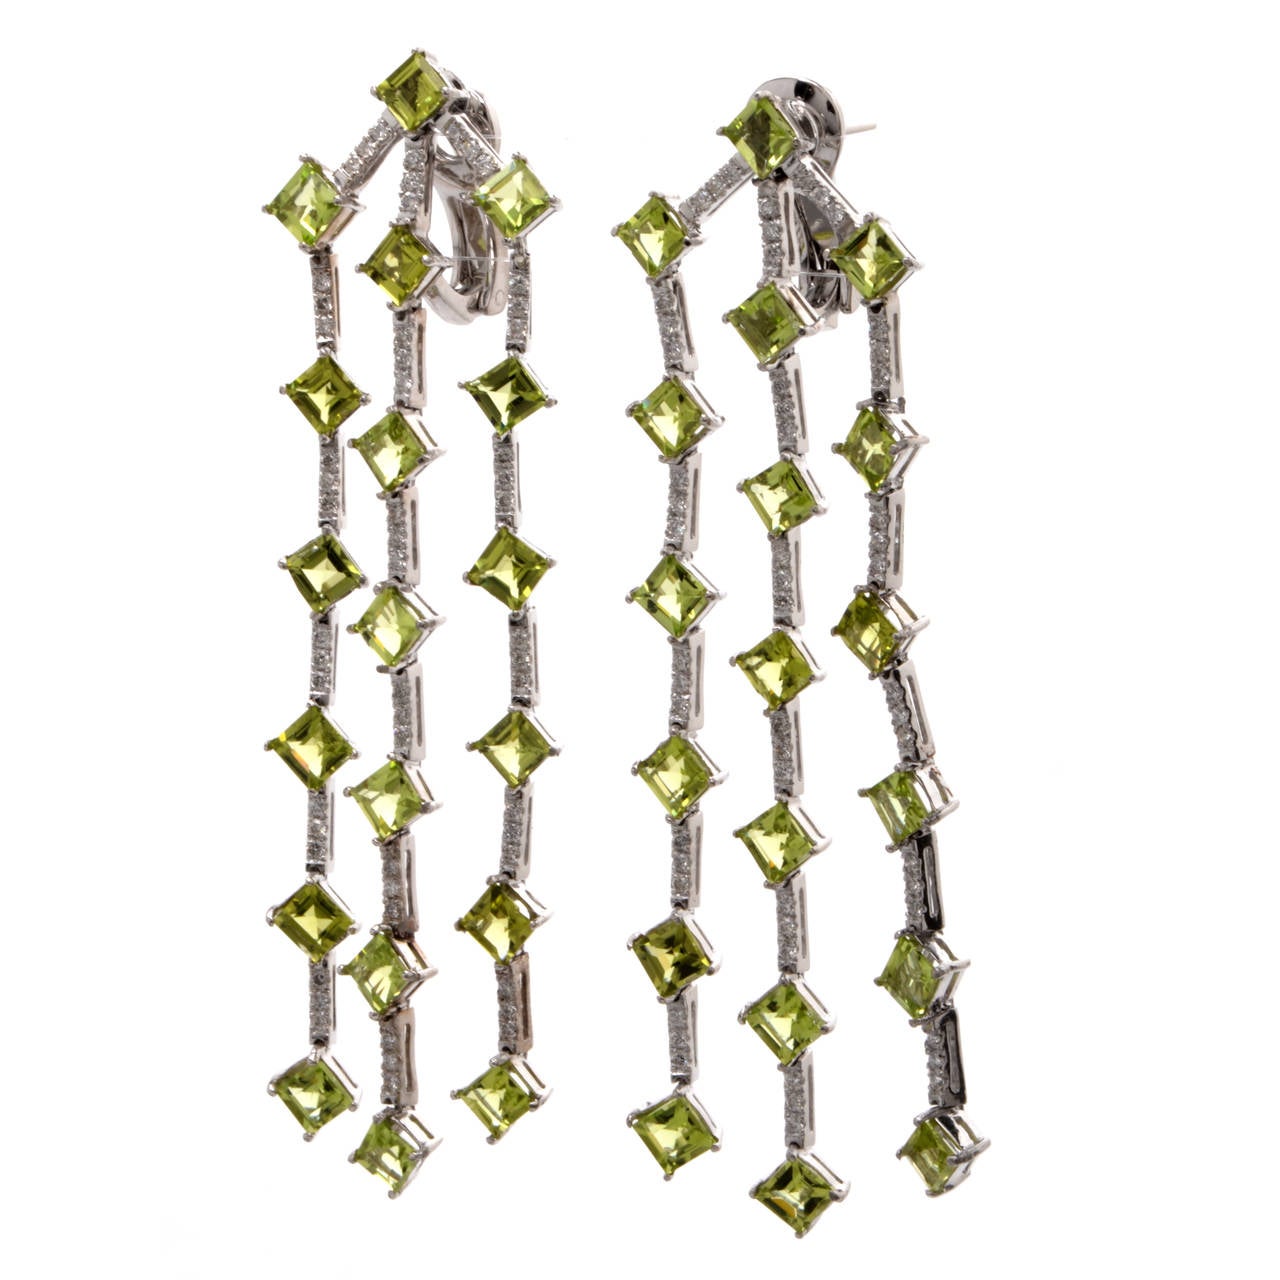 These chandelier earrings with peridot and diamonds are crafted in solid platinum, weighing 30.7 grams and measuring 3